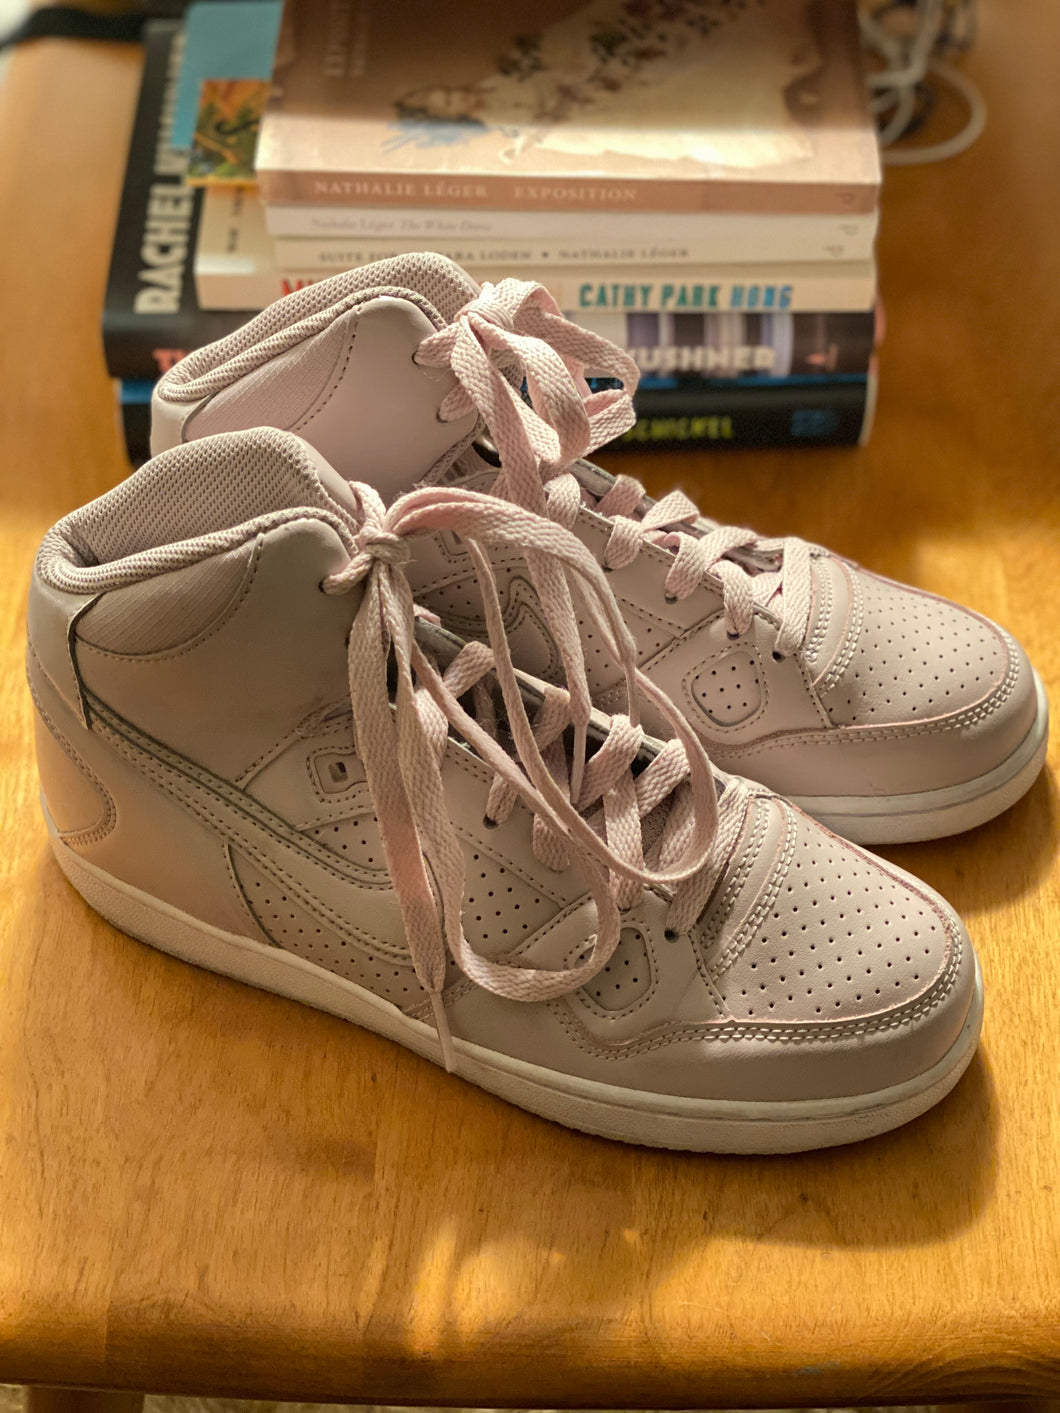 Women’s Nike Air Force Ones in Pale Lavender - The Curatorial Dept.